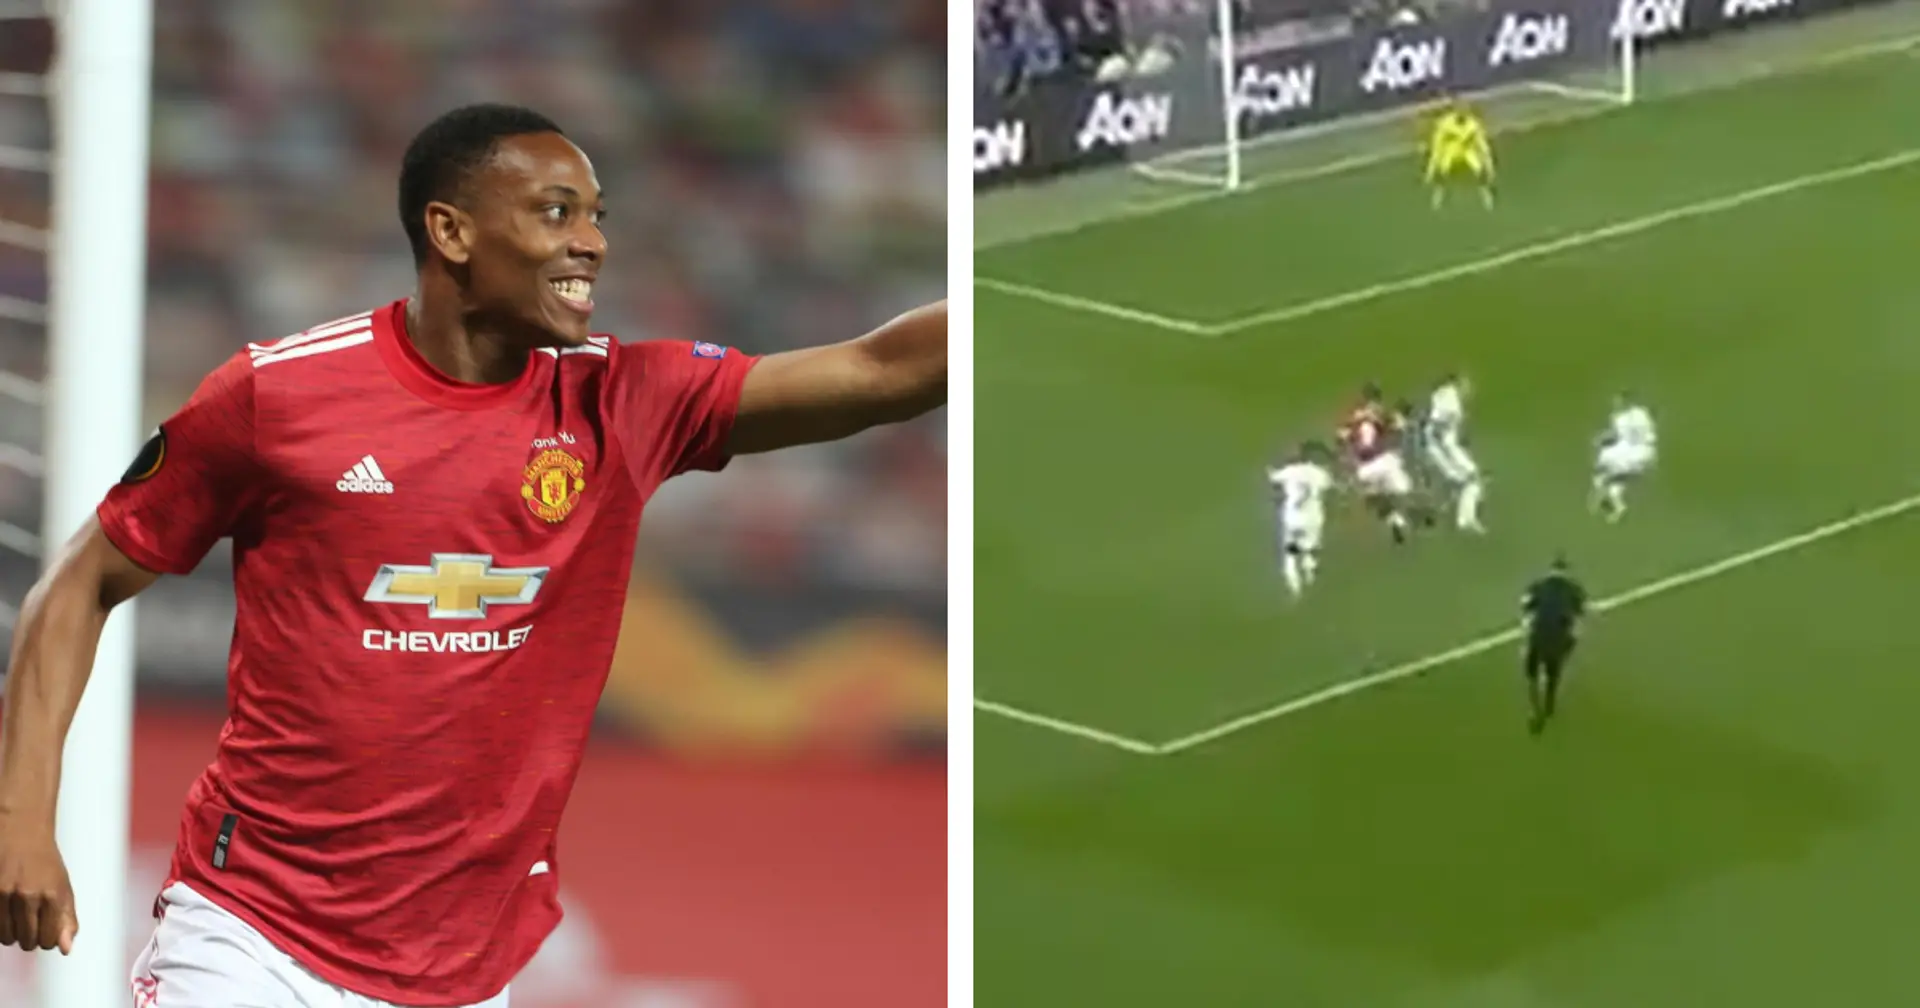 Anthony Martial will face Martin Skrtel once again - 5 years after humiliating him on Man United debut